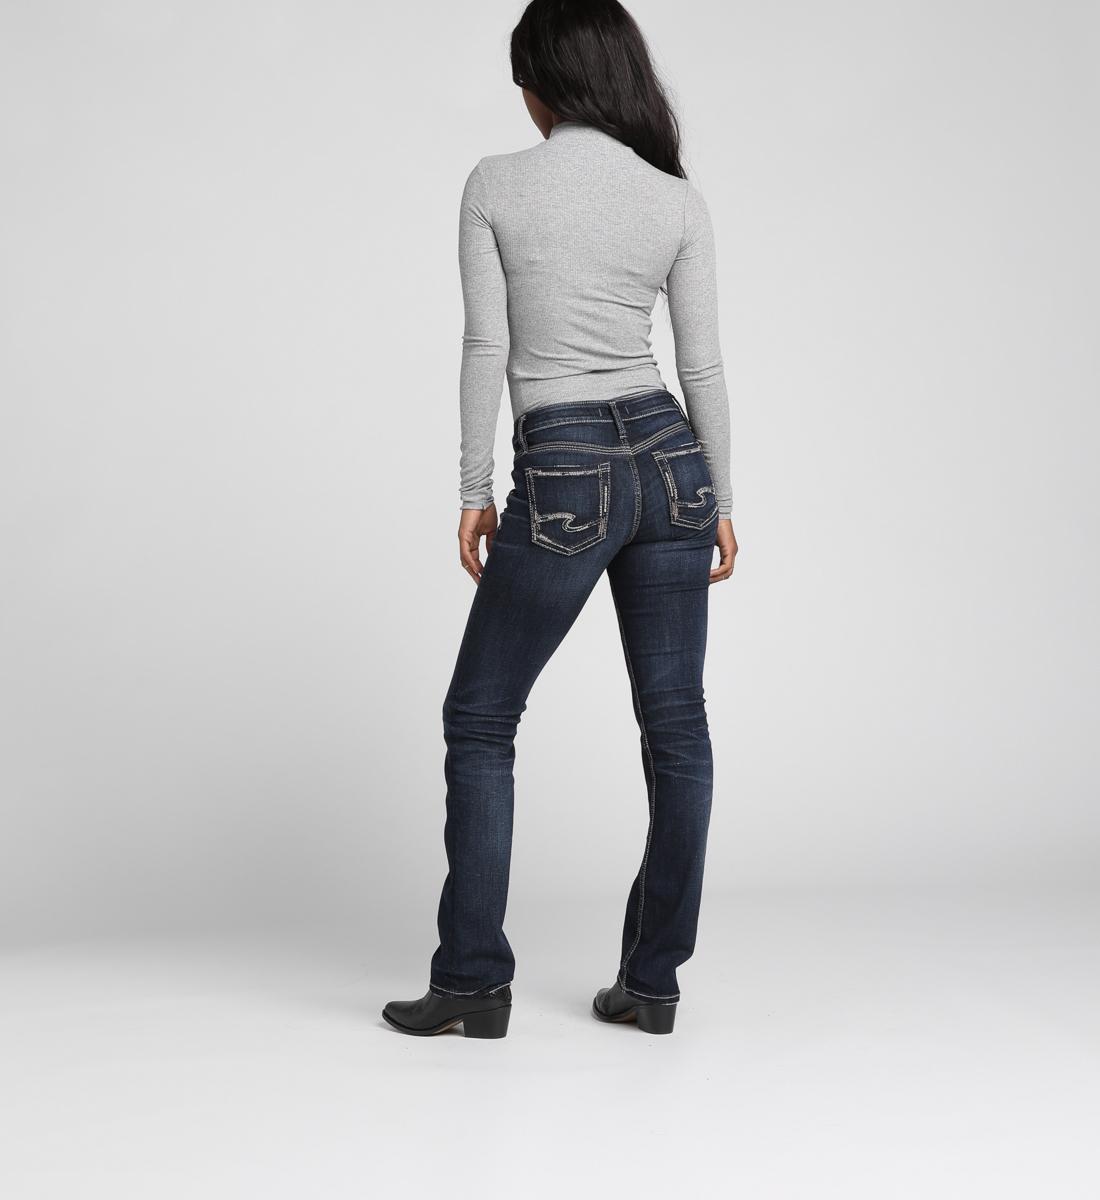 silver tuesday jeans clearance